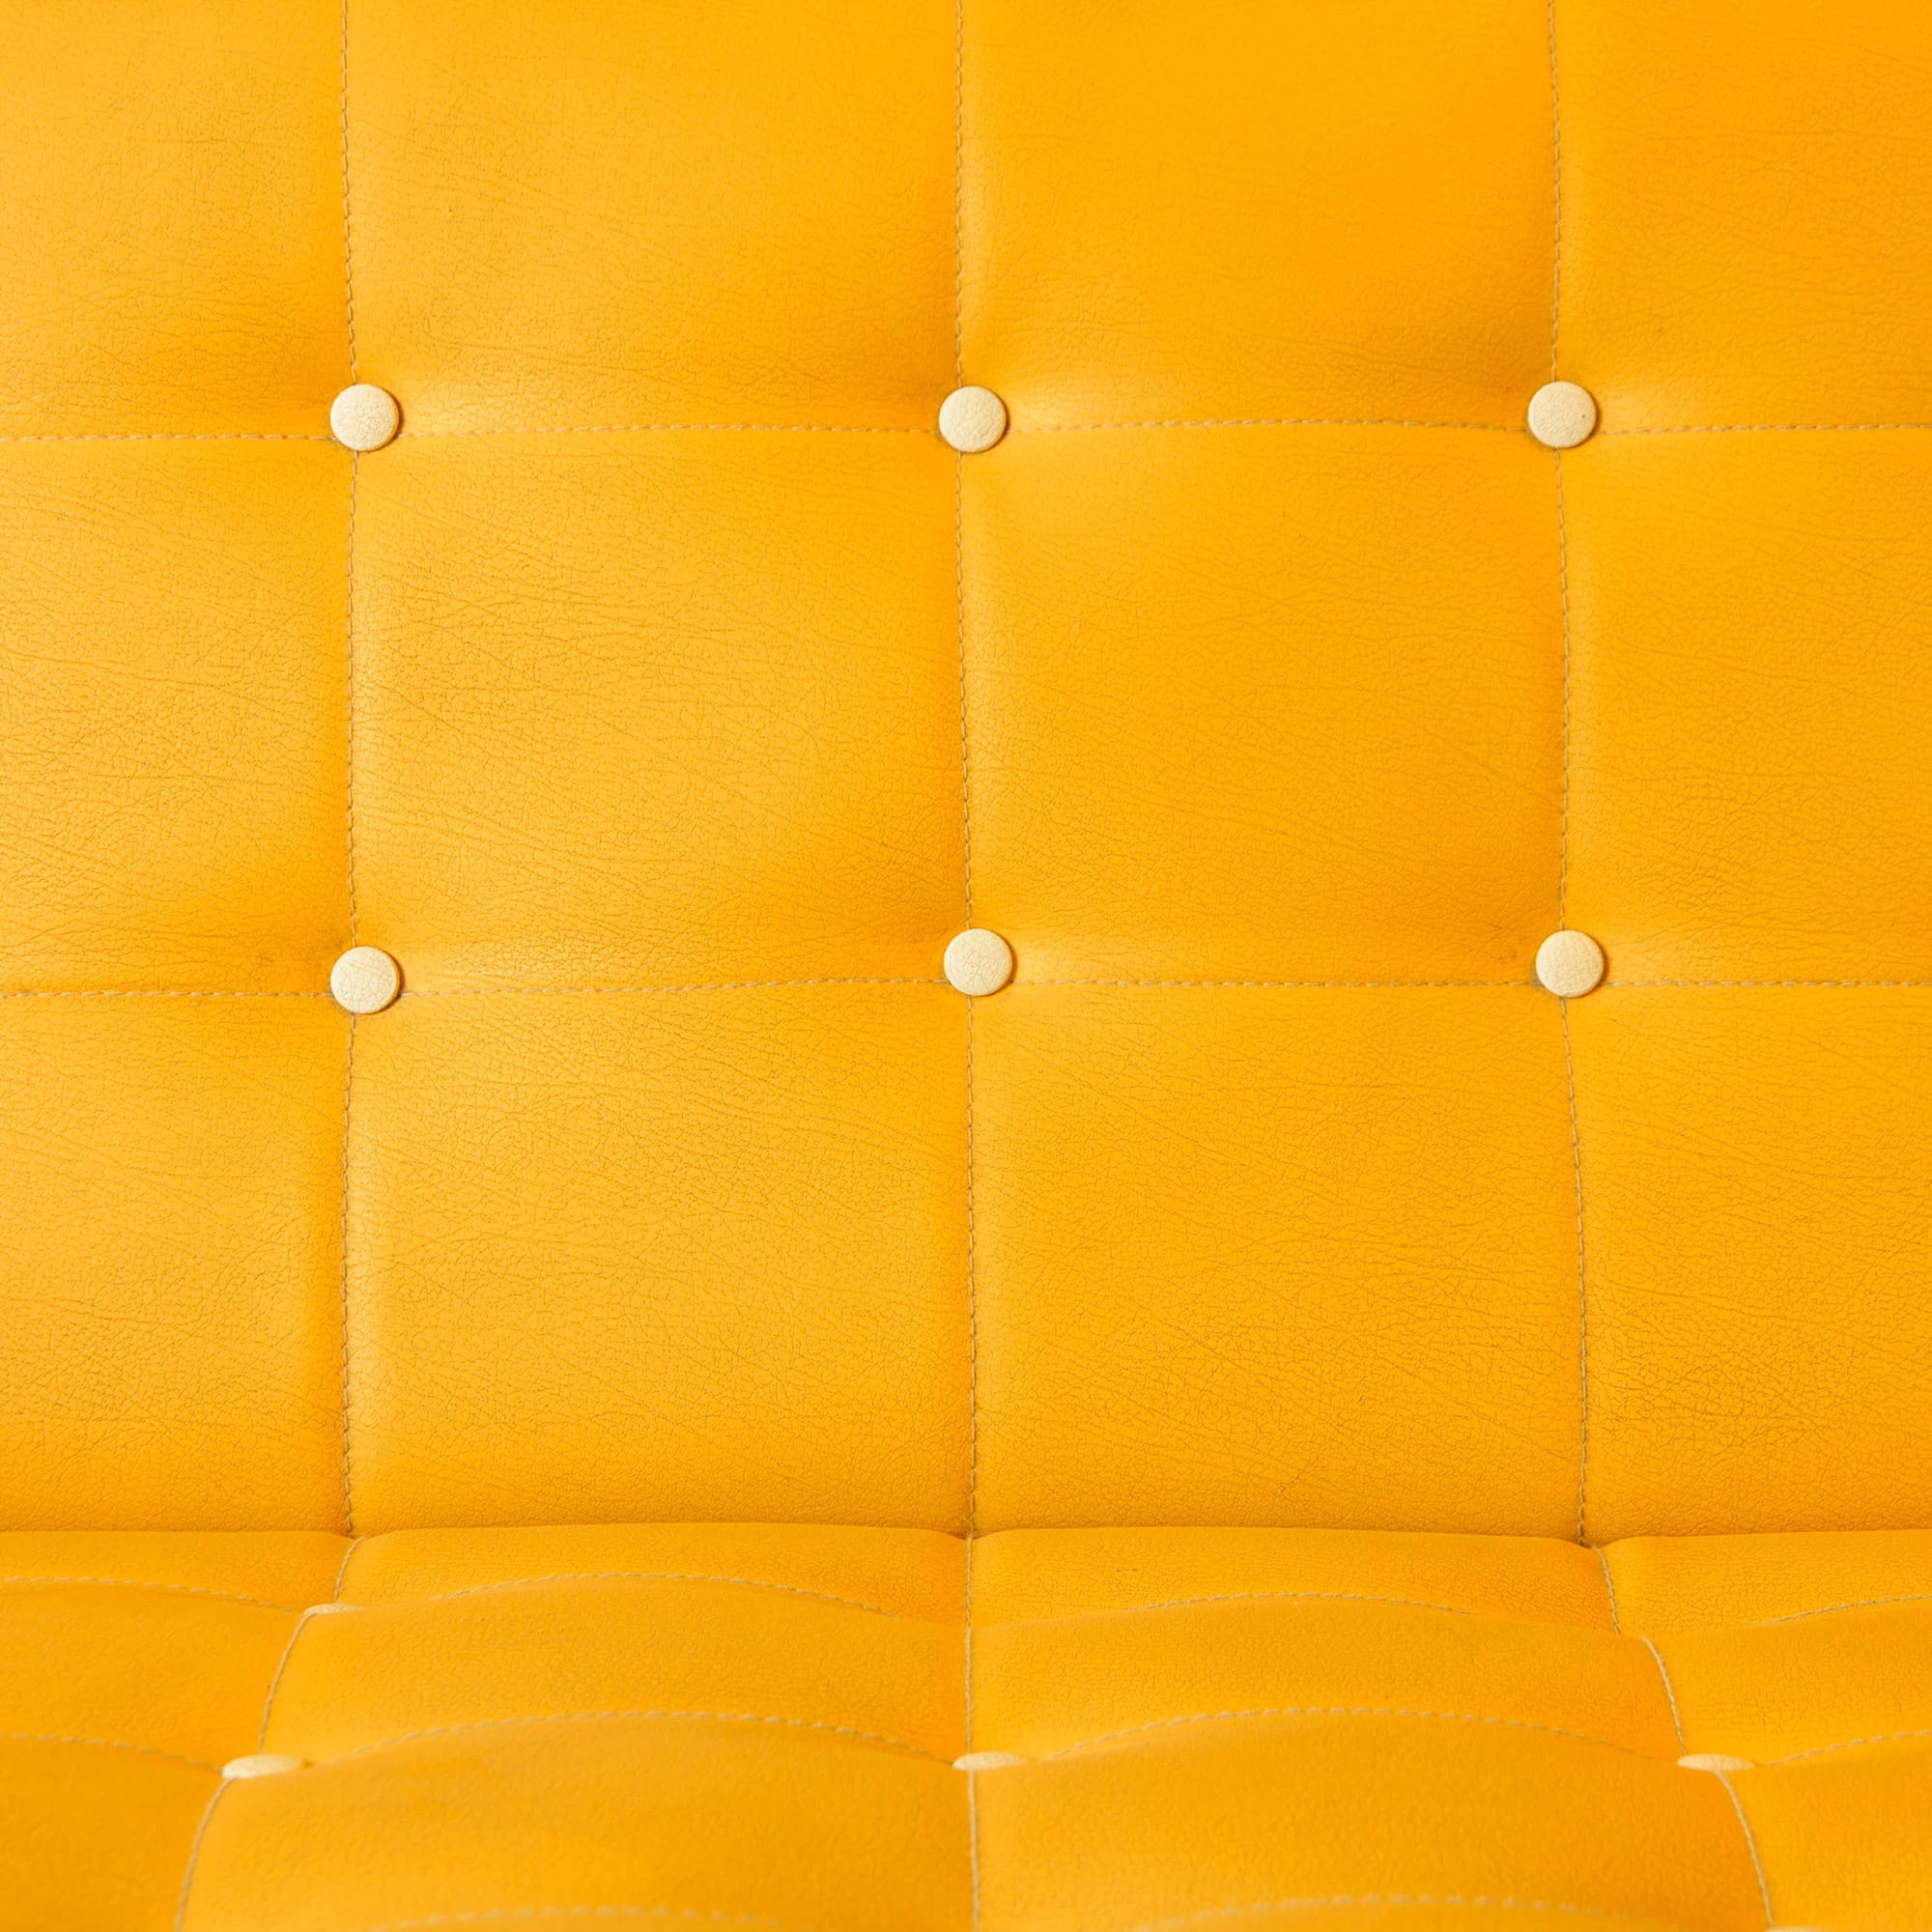 hill upholstery and design - yellow